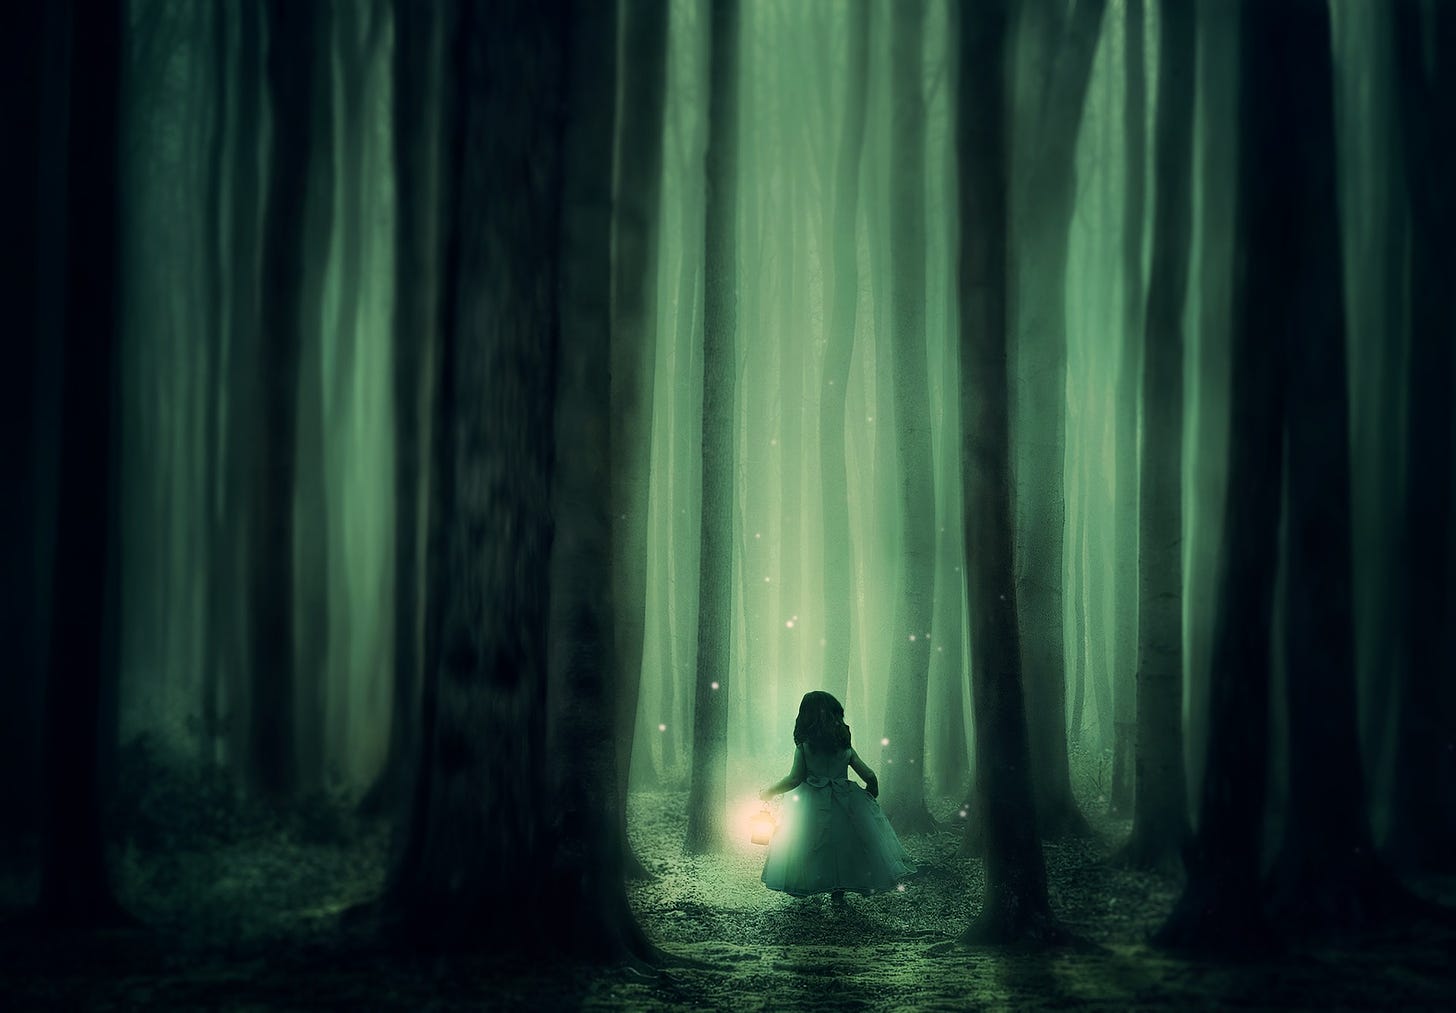 Forest lit by green otherworldly light and silhouette of girl walking towards the sparkles ahead.